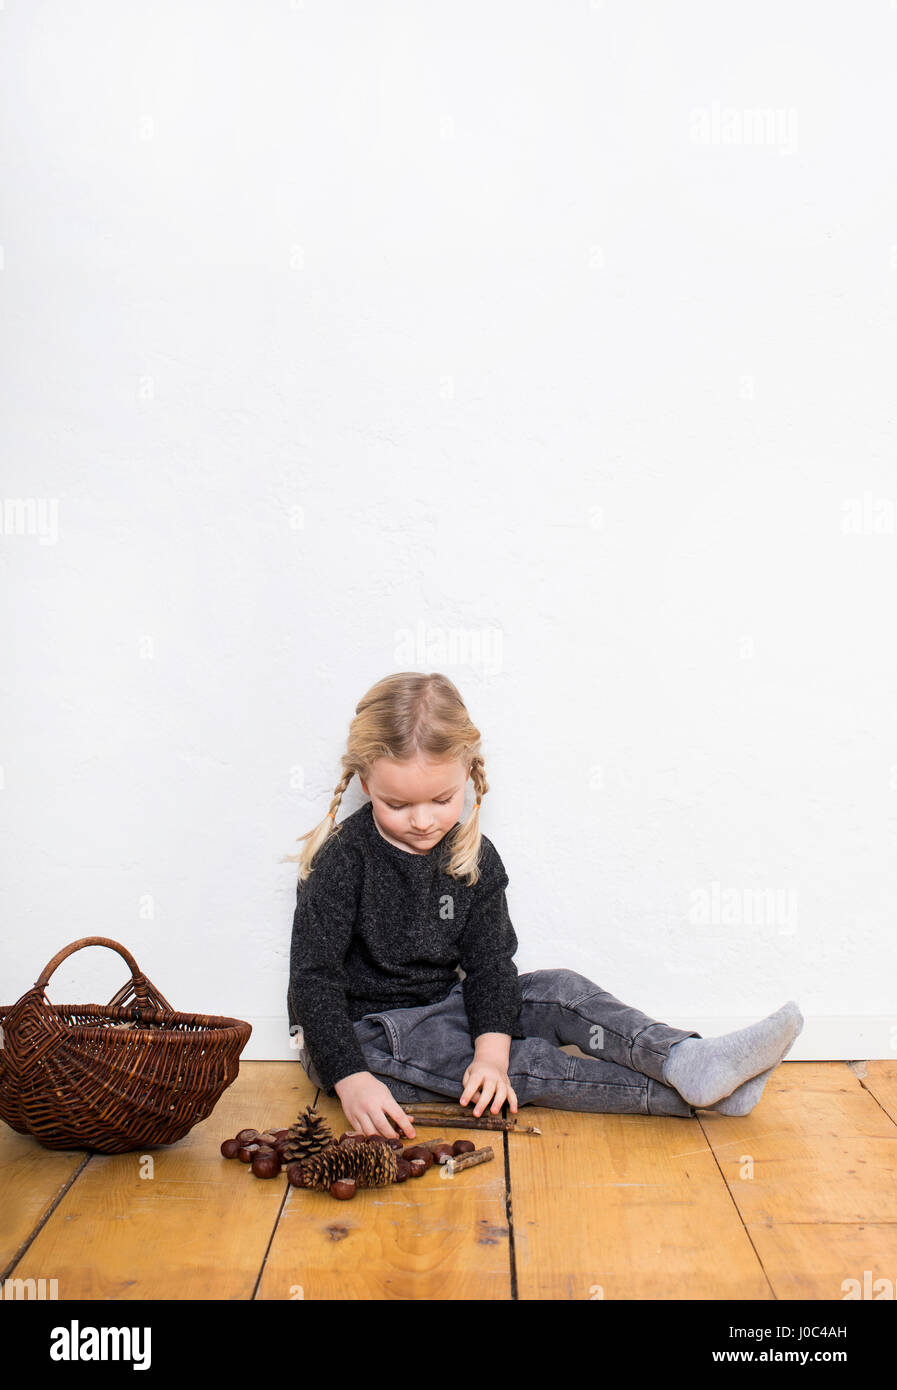 Young girl sitting on floor, sorting through pine cones and conkers Stock Photo